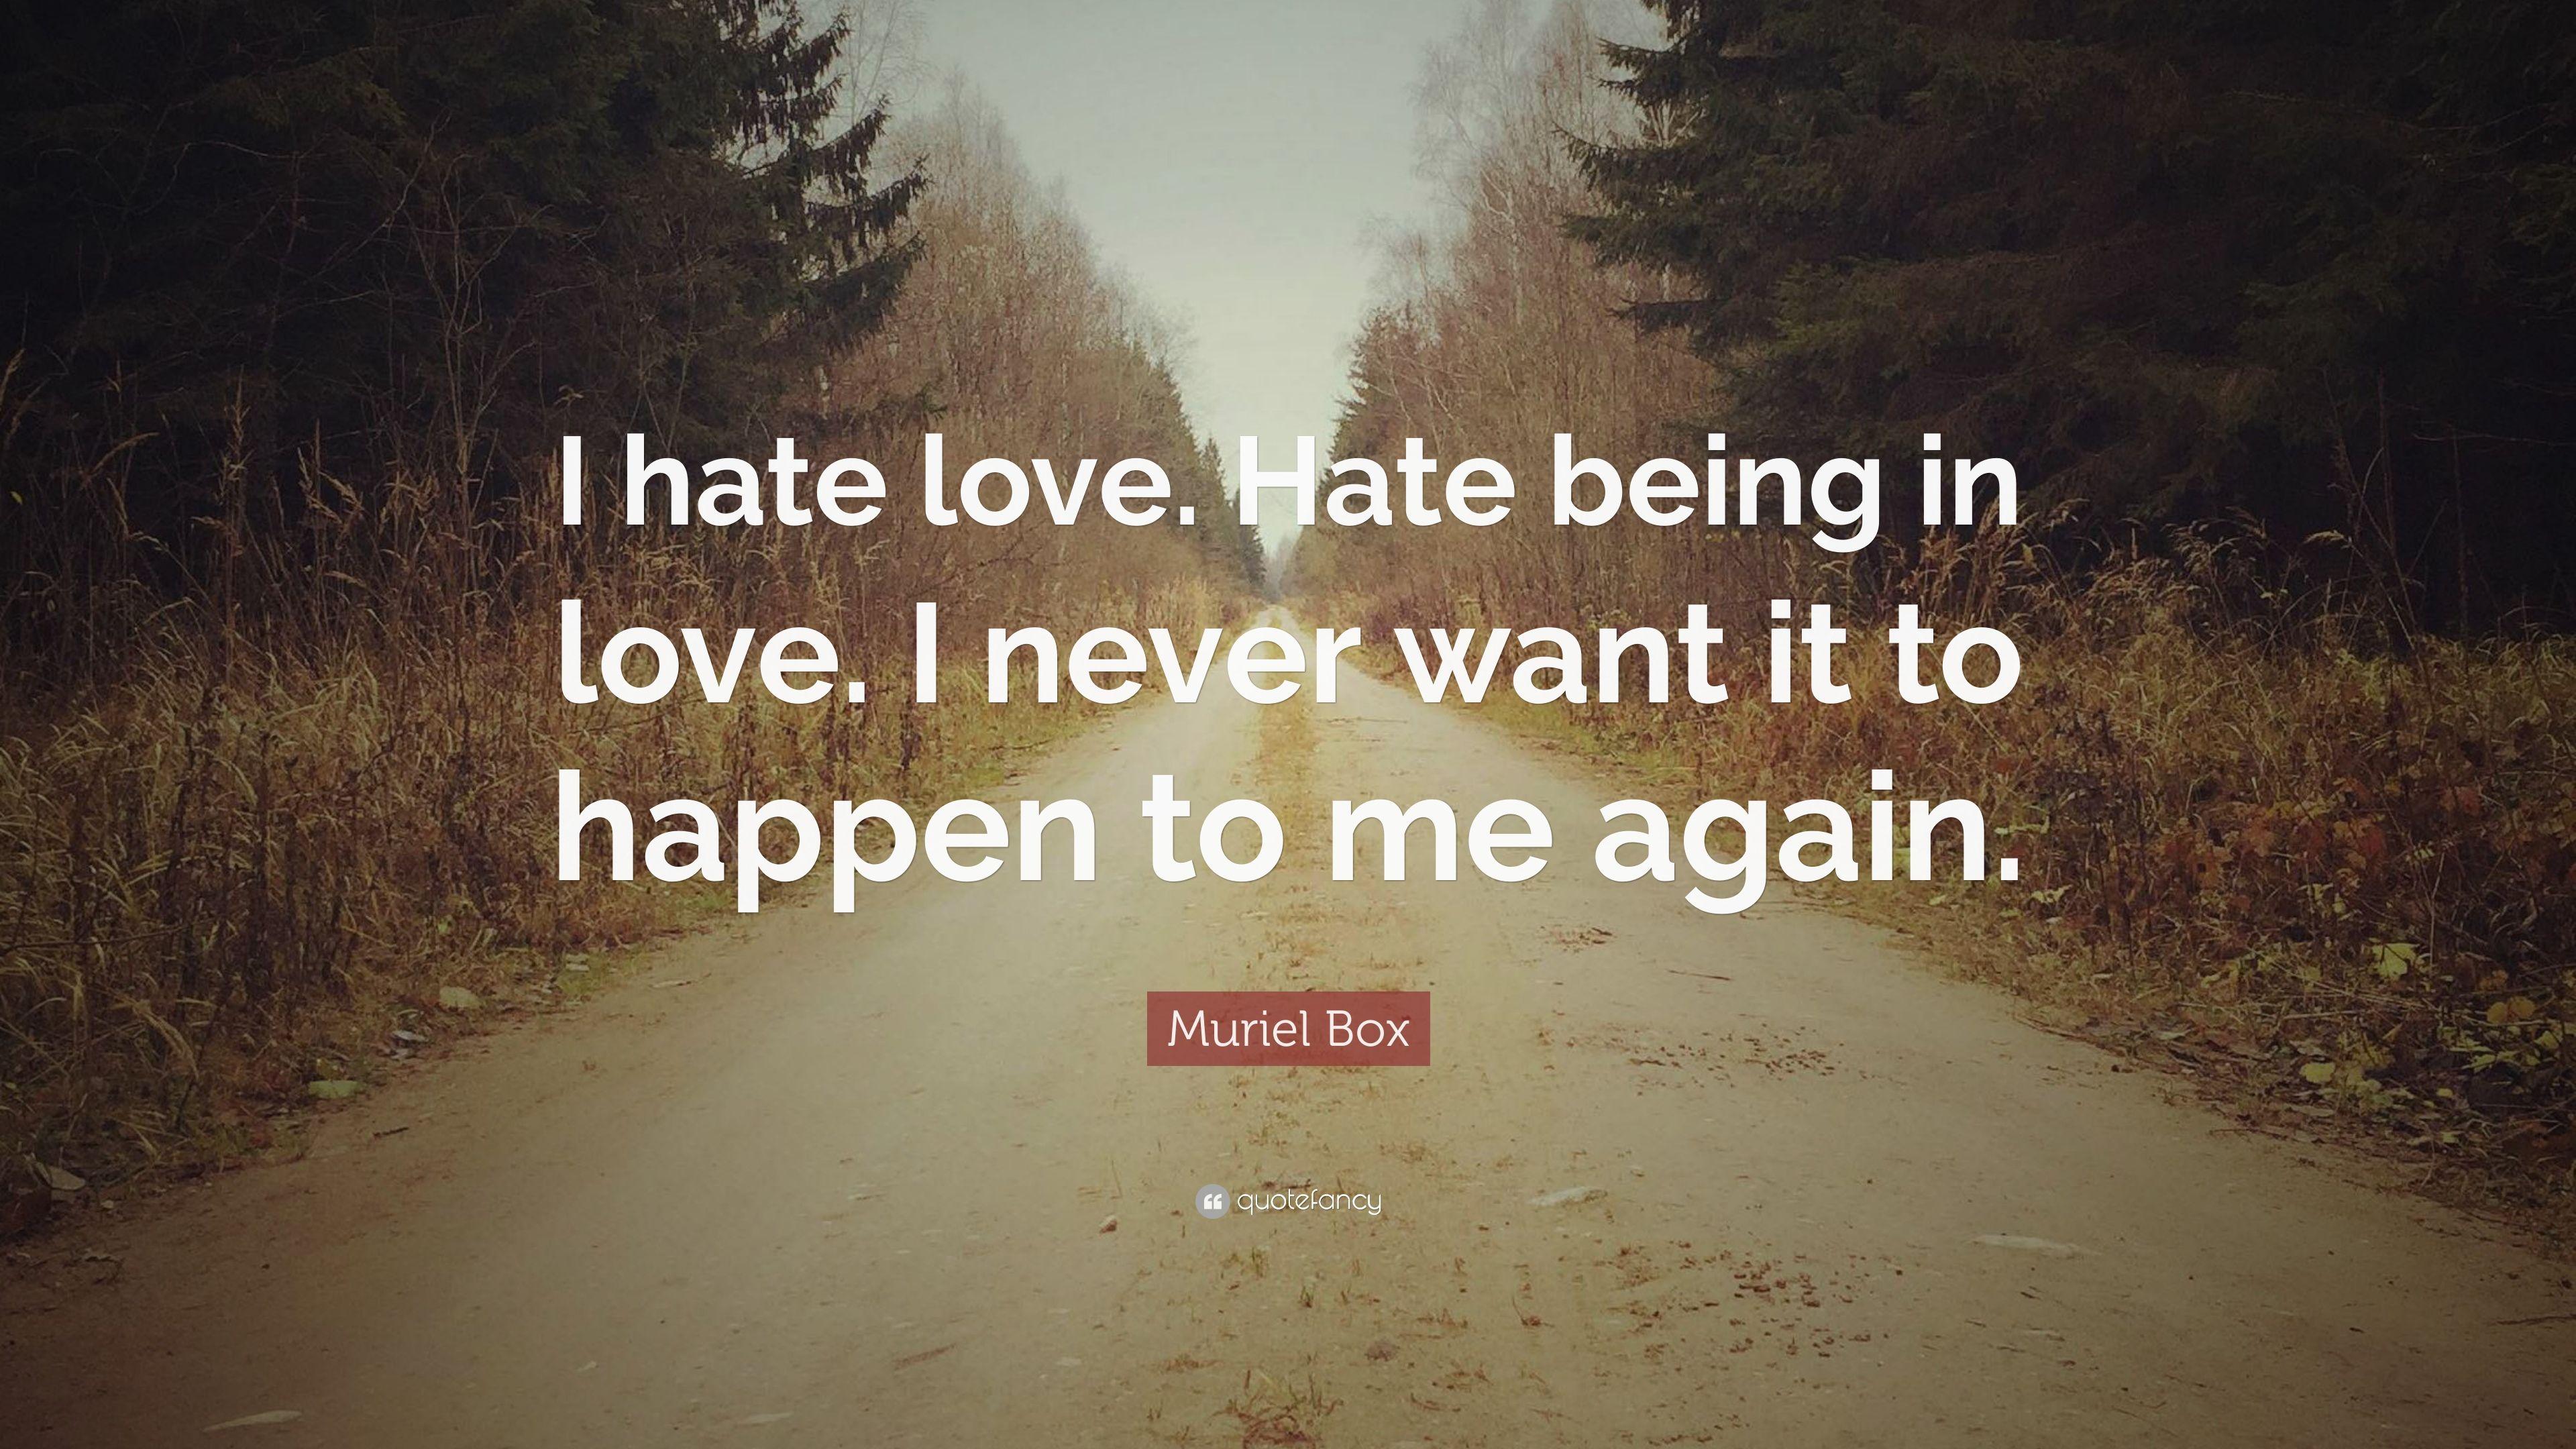 Muriel Box Quote: “I hate love. Hate being in love. I never want it to happen to me again.” (7 wallpaper)